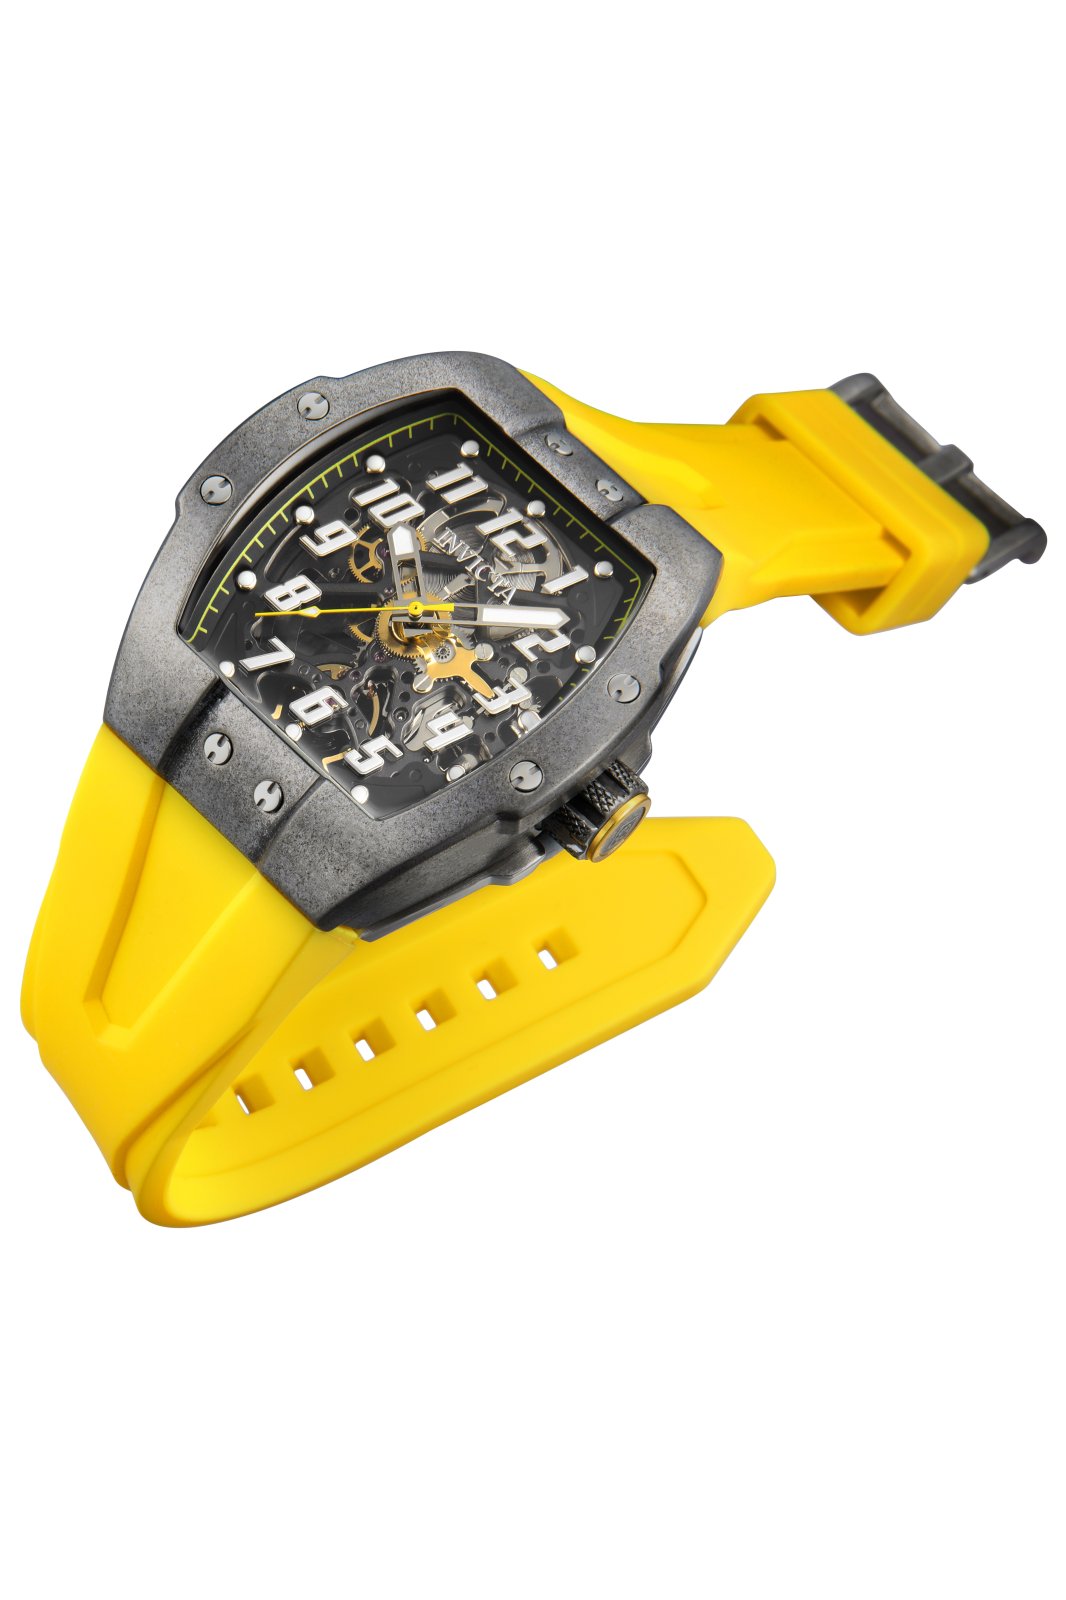 Invicta Watch JM Limited Edition 43524 - Official Invicta Store - Buy ...